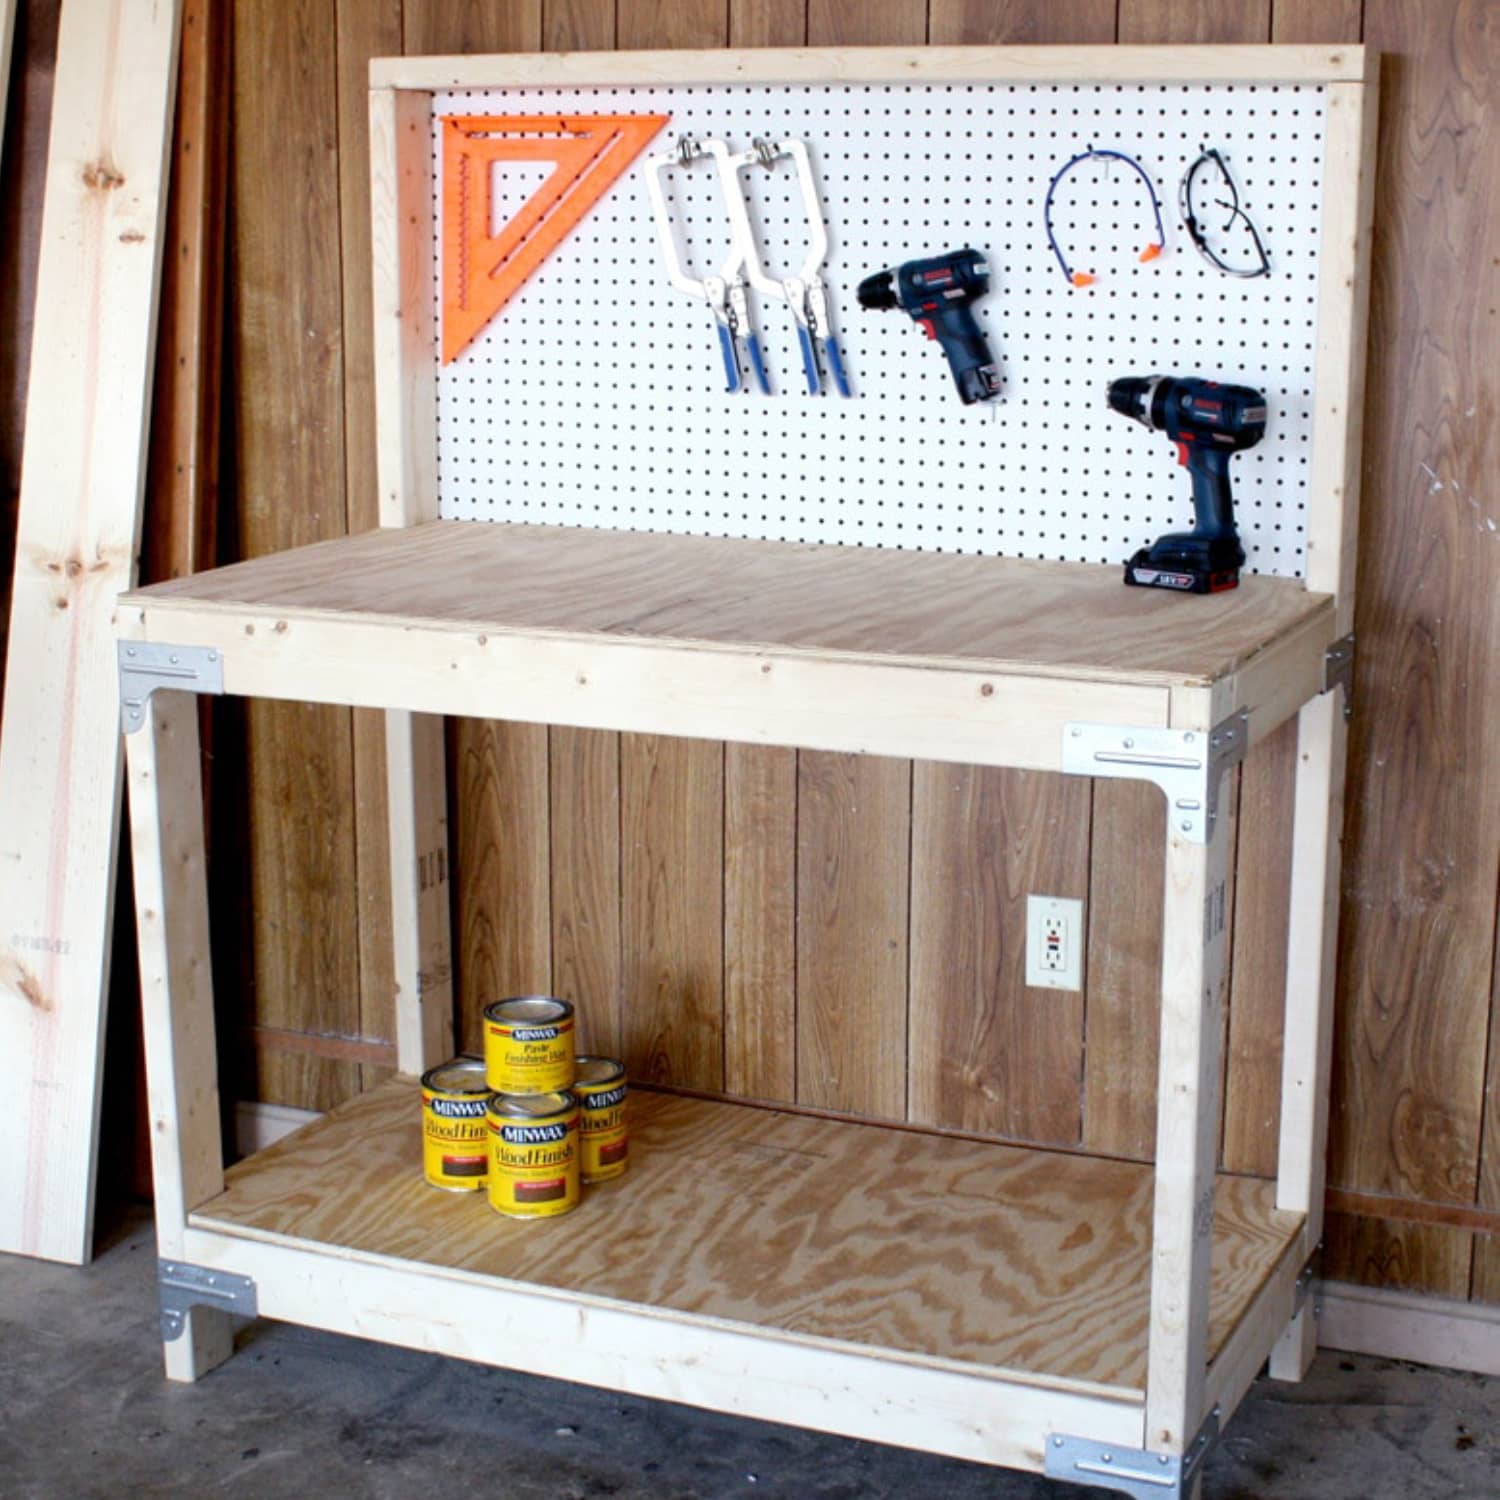 Hold-Everything Tool Rack